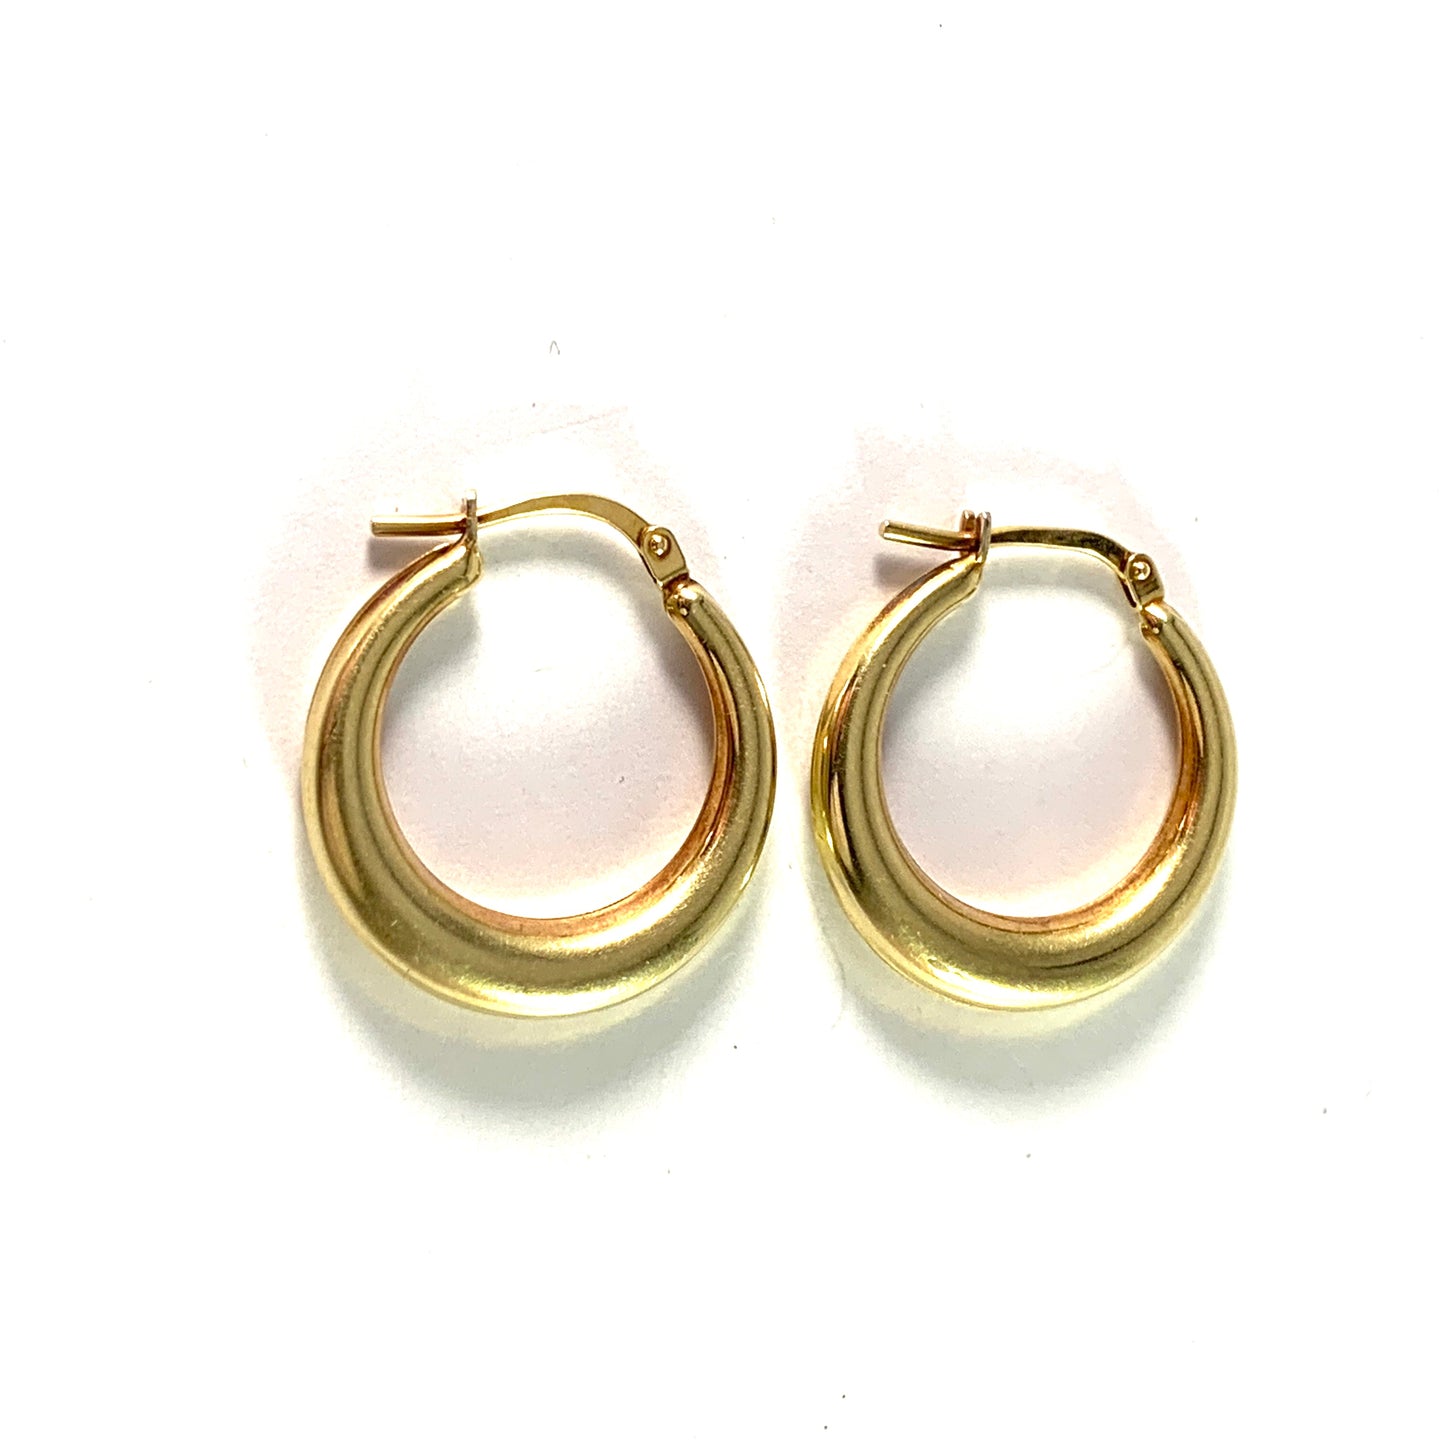 UNO A ERRE, Arezzo, Italy Vintage 18k Gold Earrings.